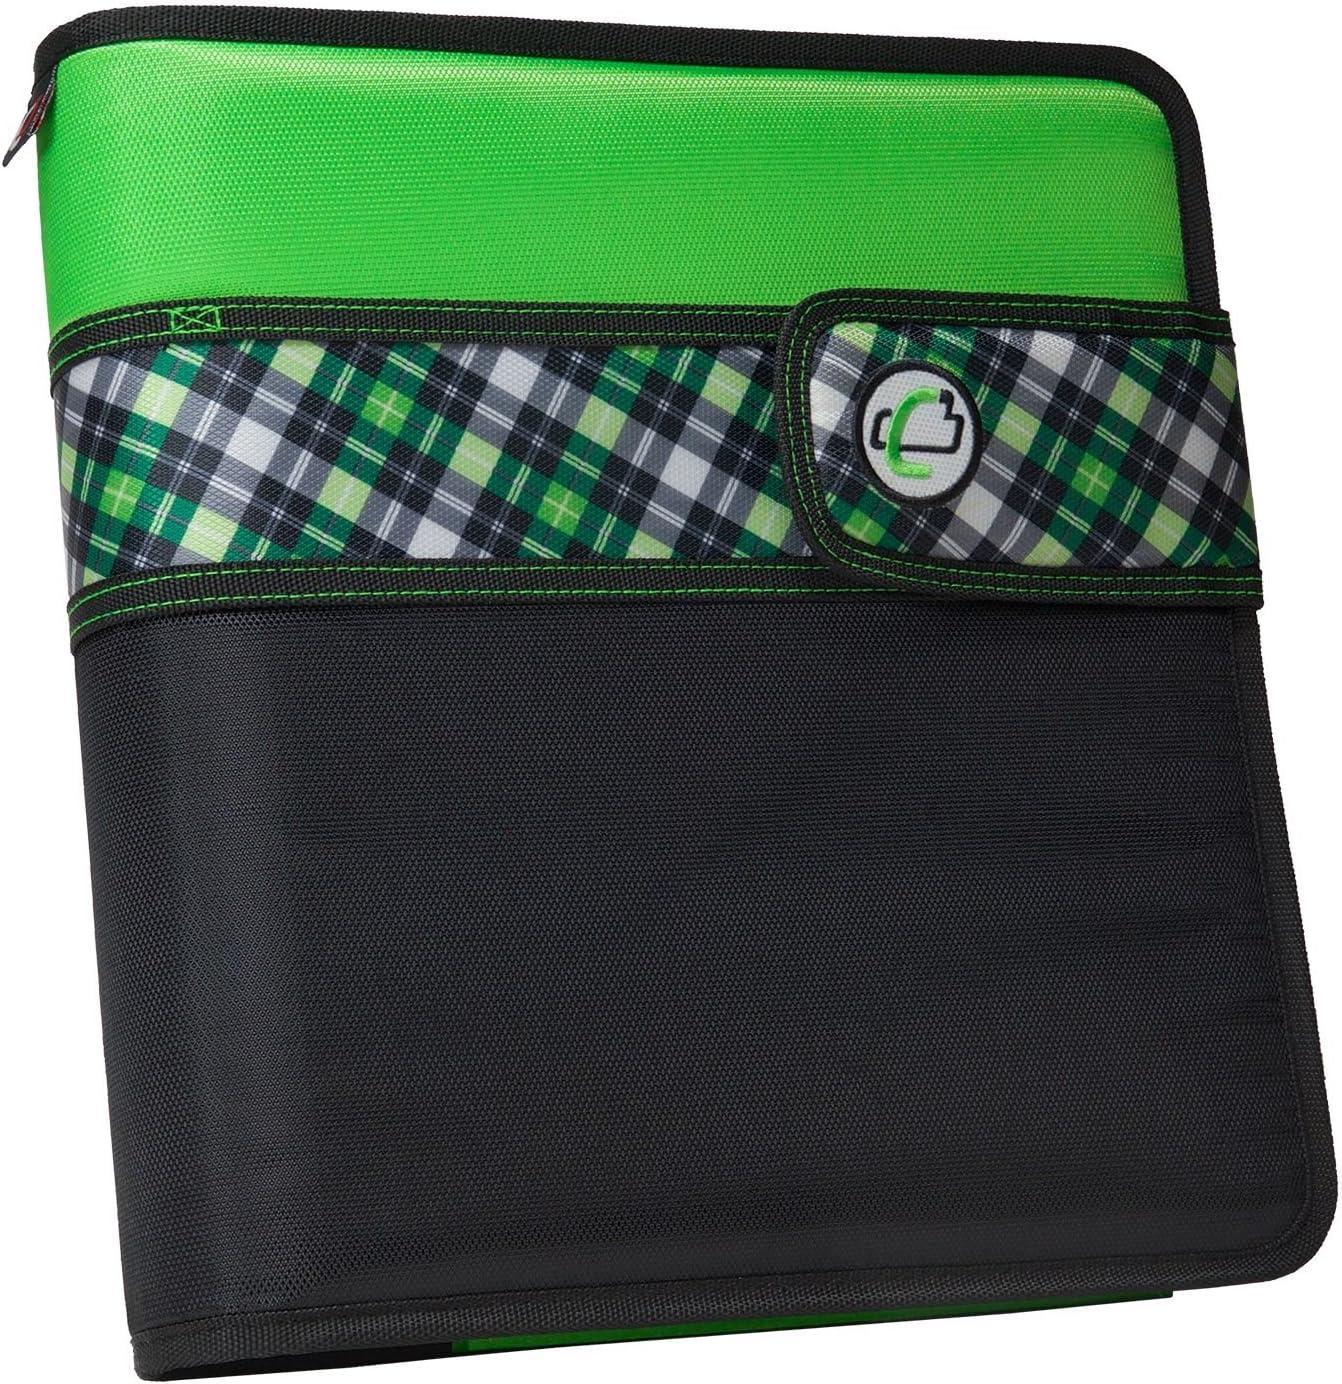 case-it open tab velcro closure 2-inch binder with tab file green plaid s-817-neognpd  case-it b01eu1gaqw